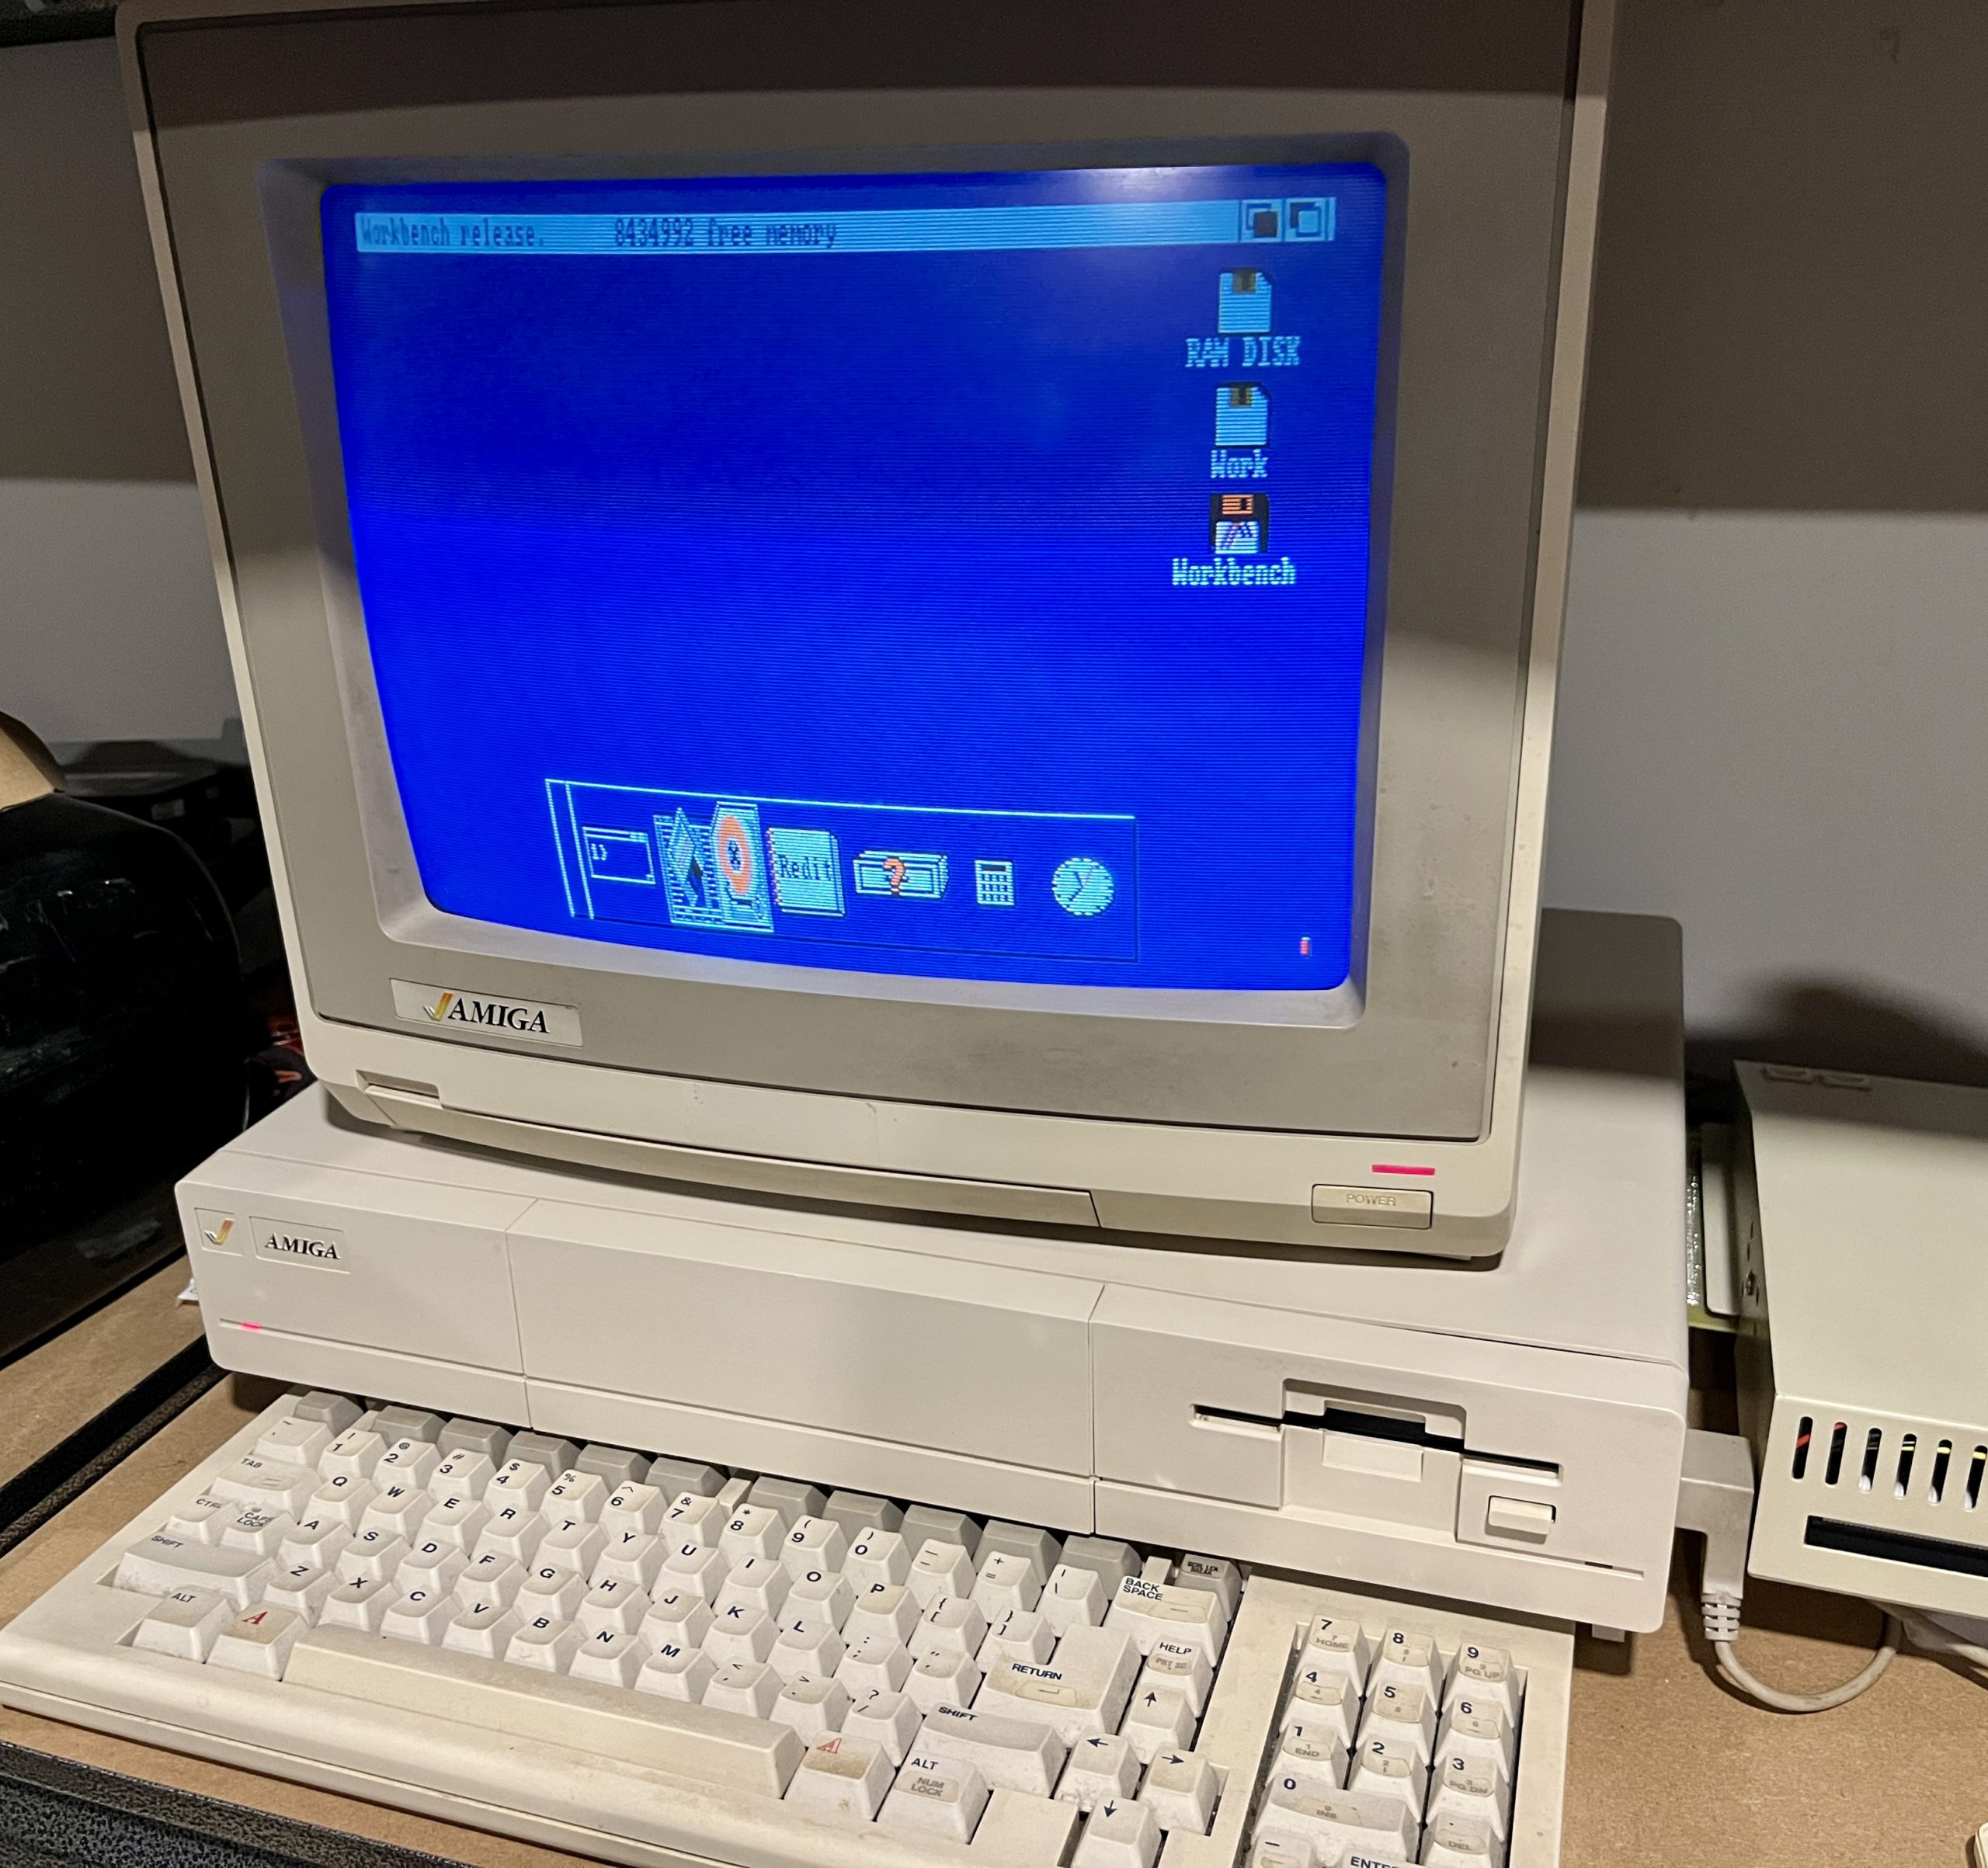 A computer and monitor, a Commodore Amiga 1000 desktop computer with a keyboard in front, an expansion unit attached to the right side, and the Commodore Amiga 1080 monitor on and showing the blue and white Workbench display